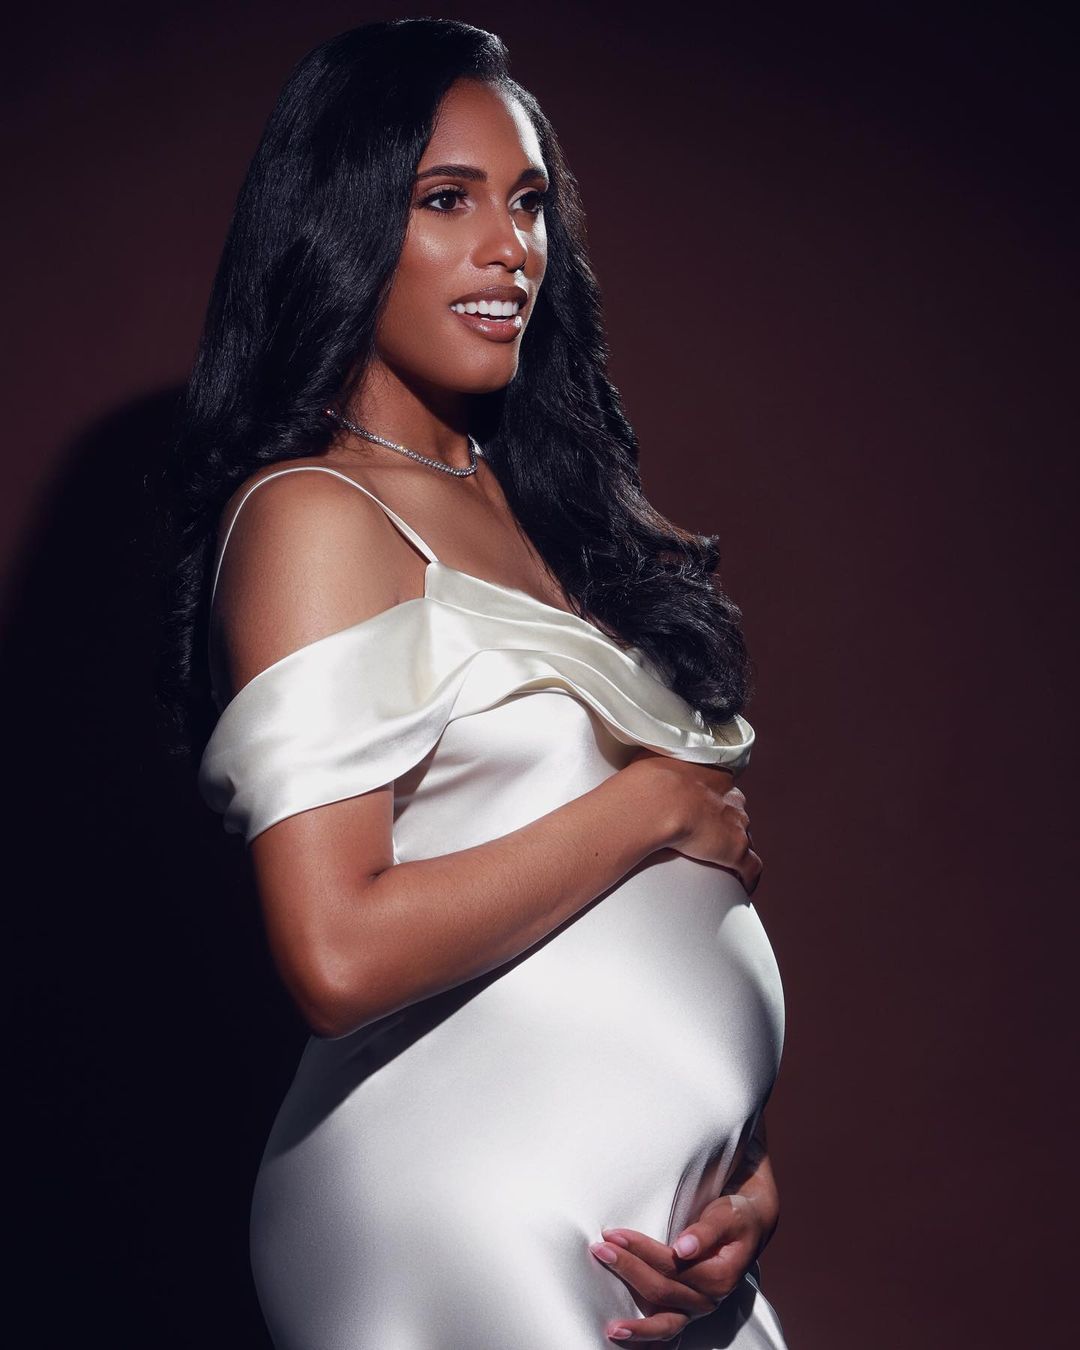 Kristi Castlin, the American sprint hurdles bronze medallist at the Rio 2016 Olympic Games, recently announced that she is pregnant.